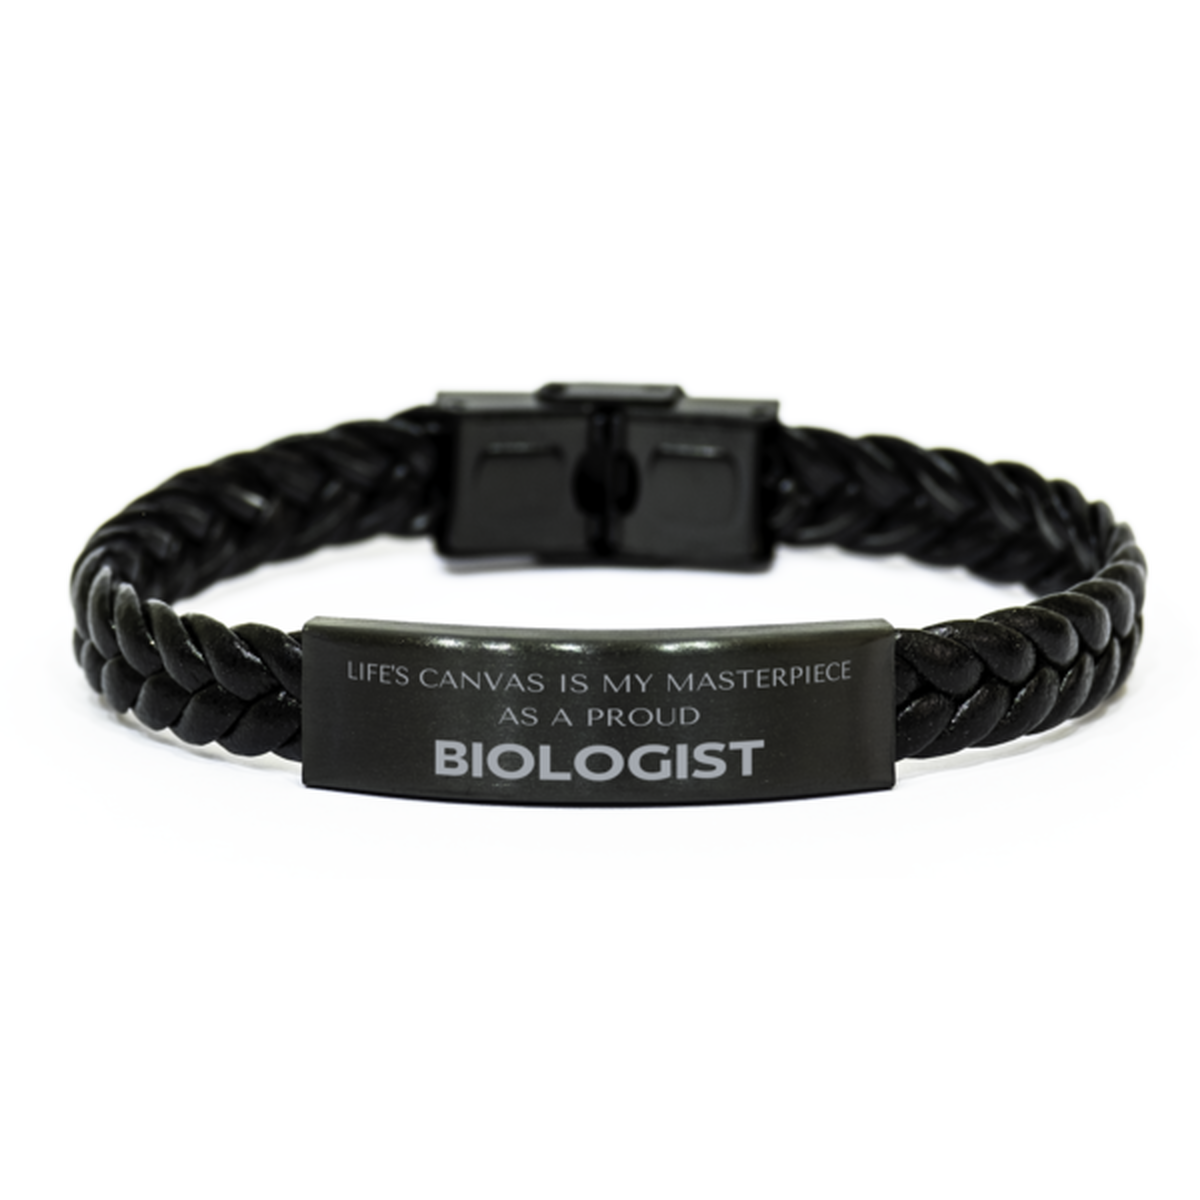 Proud Biologist Gifts, Life's canvas is my masterpiece, Epic Birthday Christmas Unique Braided Leather Bracelet For Biologist, Coworkers, Men, Women, Friends